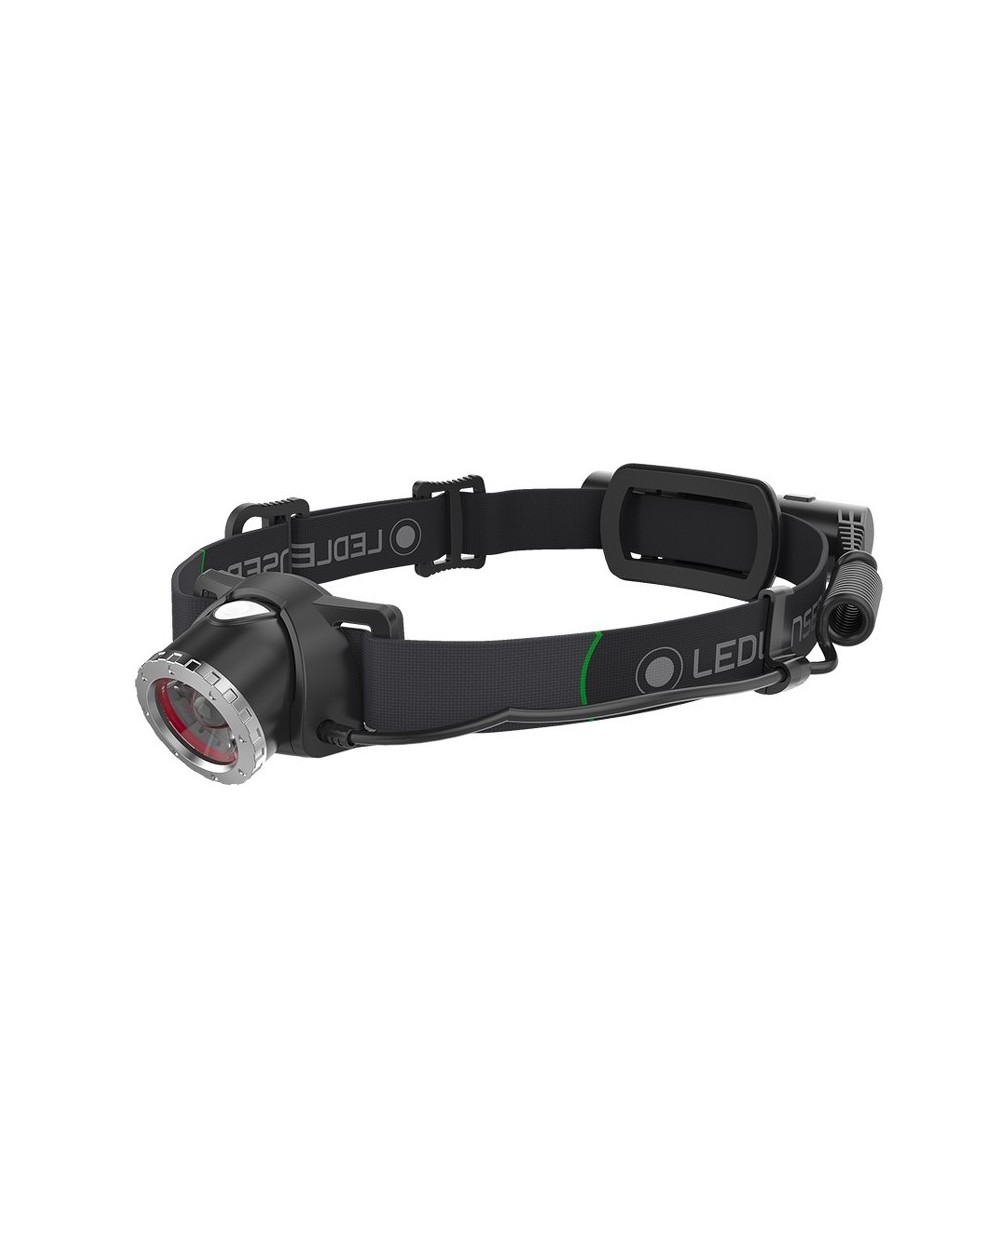 Lampe frontale 600 lumens rechargeable Led Lenser